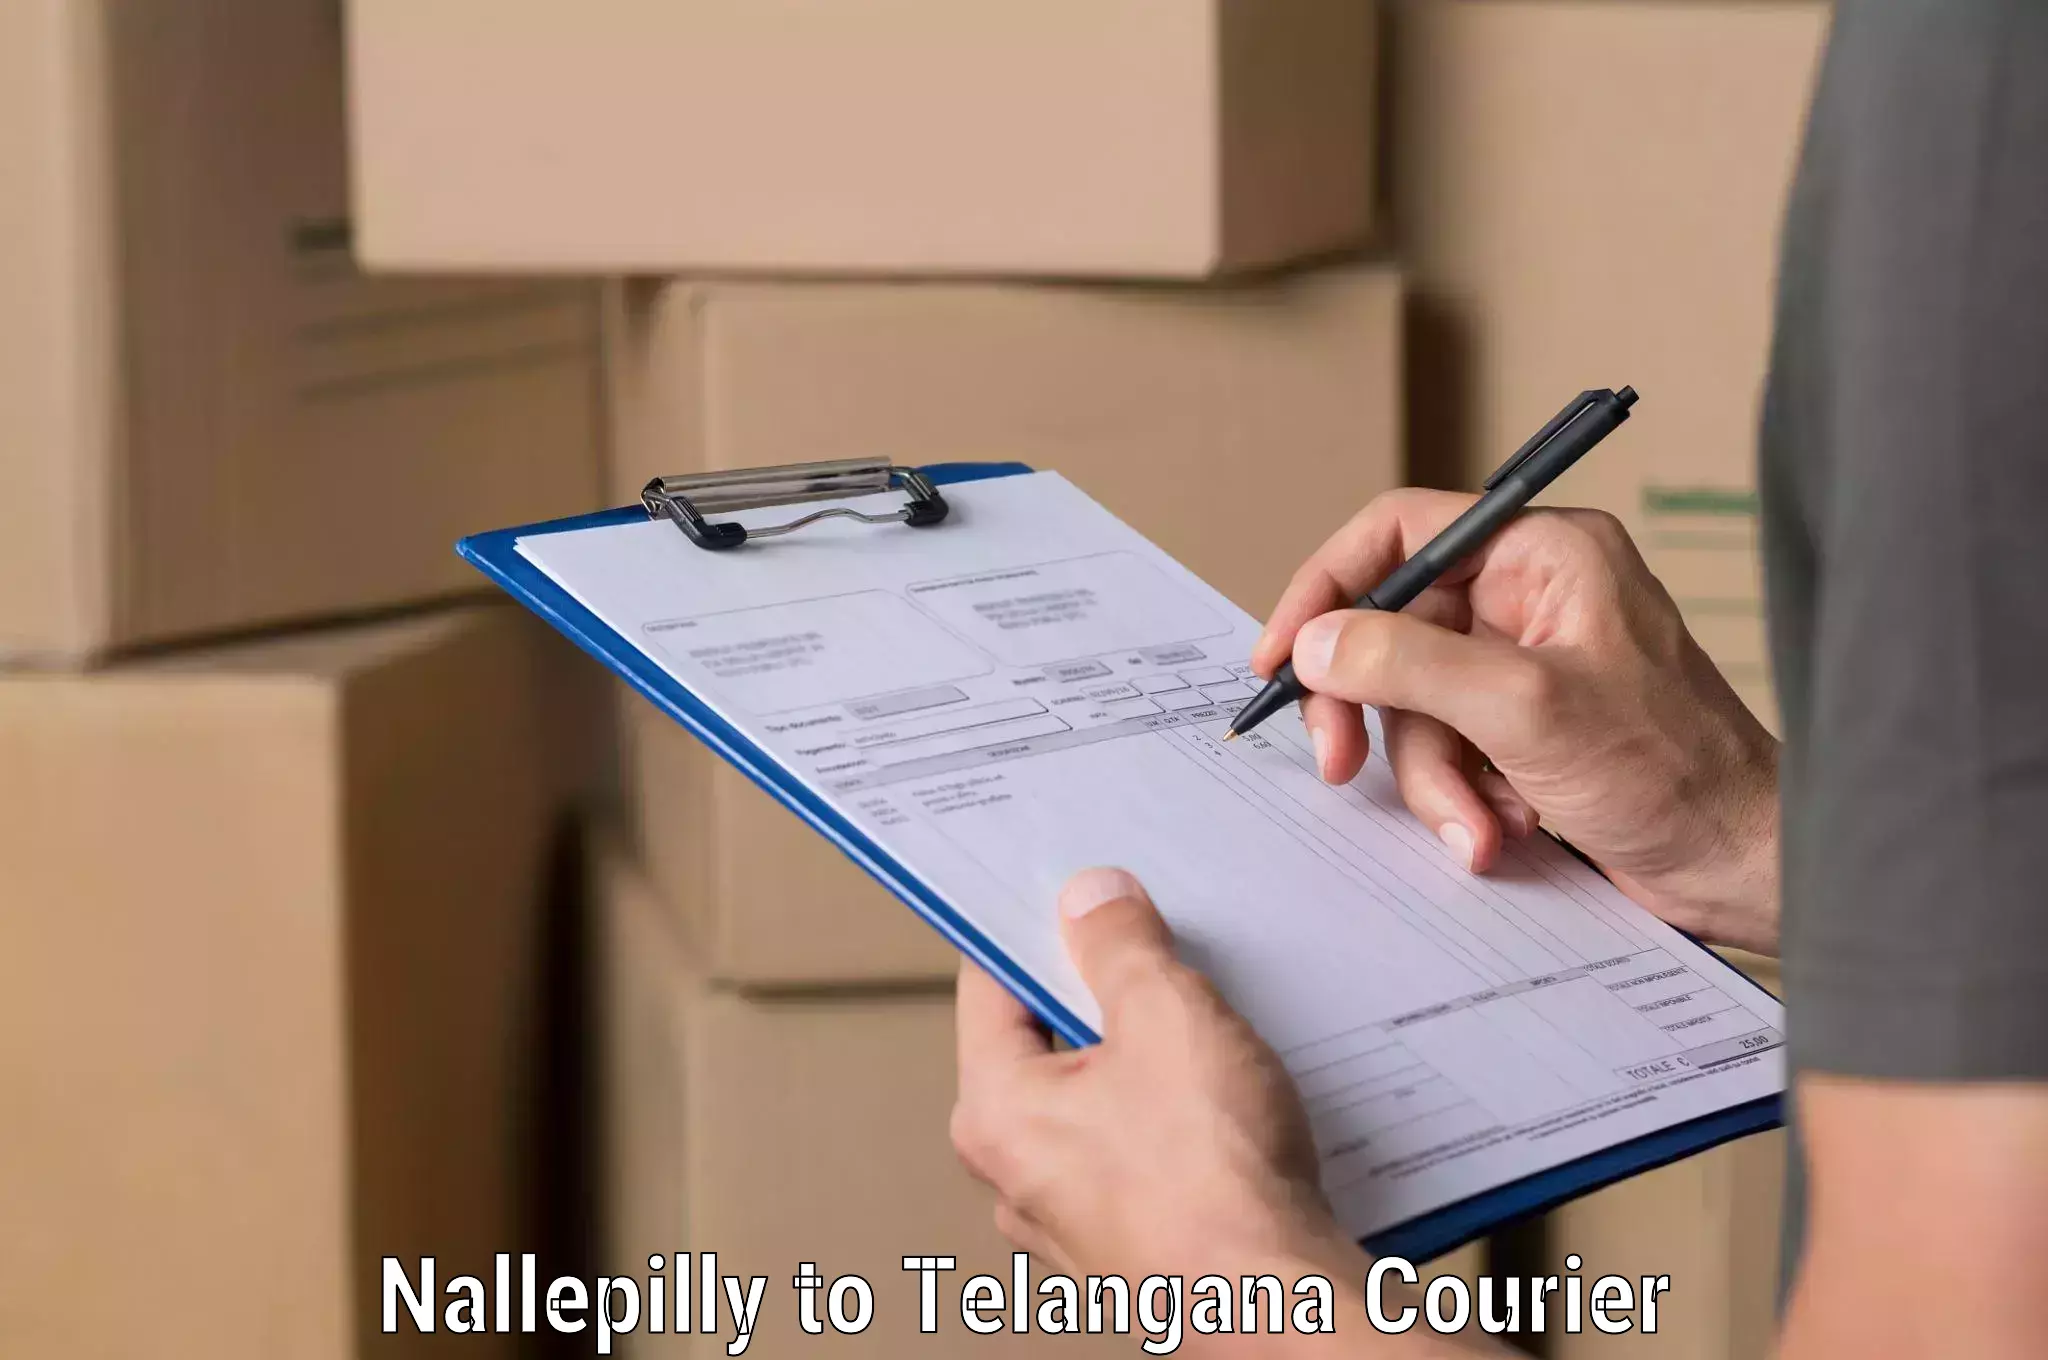 Efficient freight service Nallepilly to Wyra